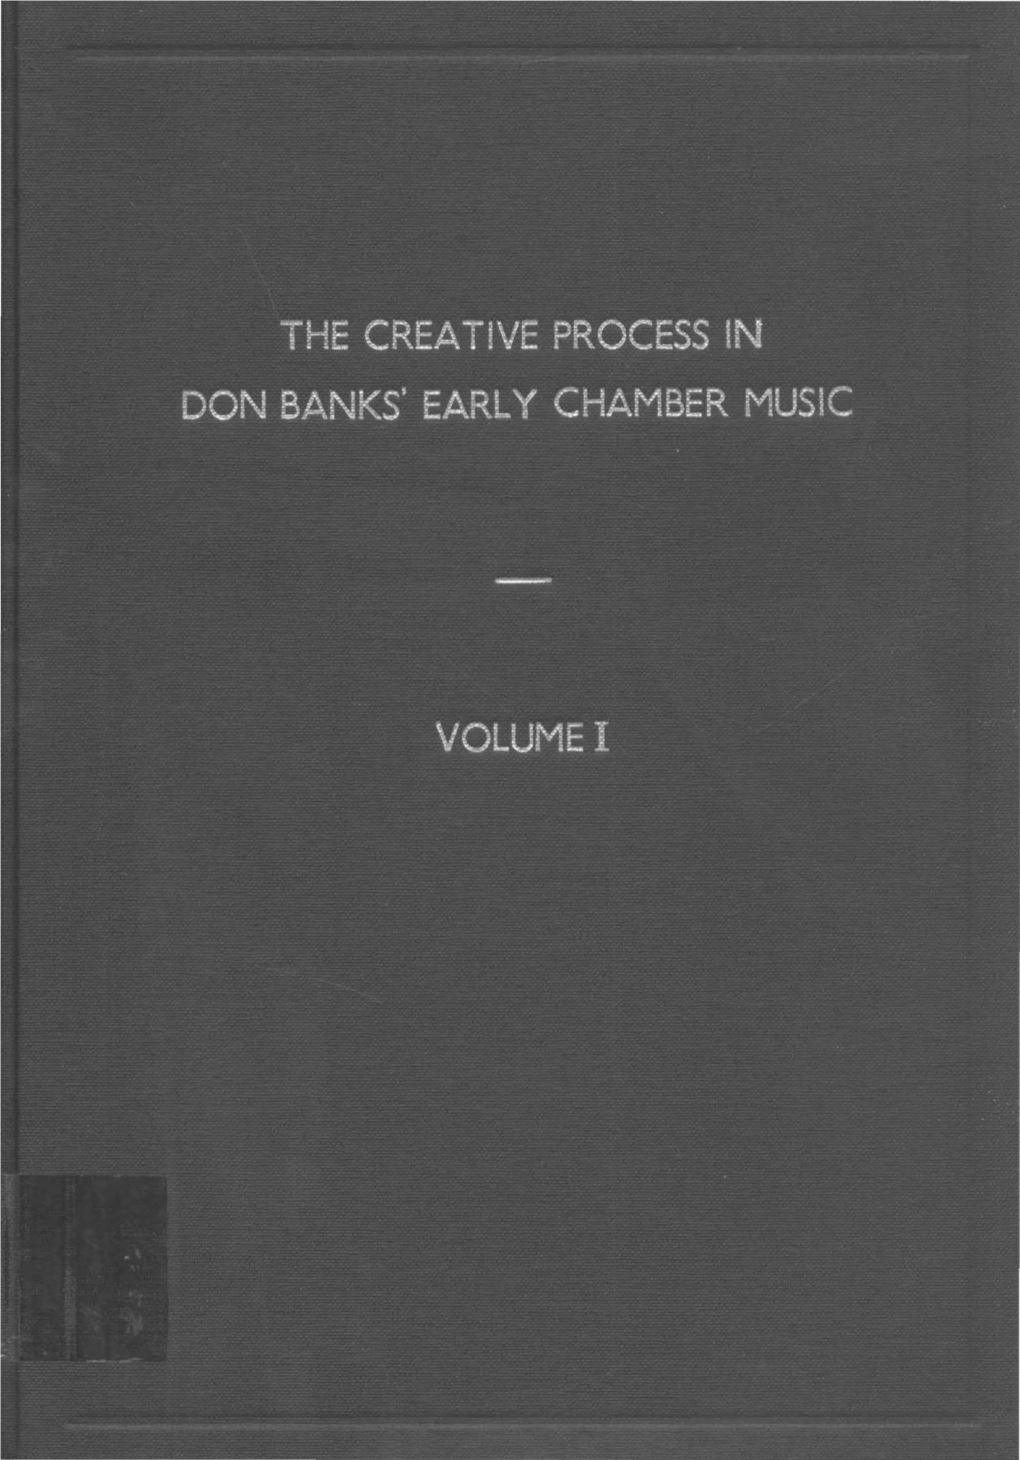 The Creative Process in Don Banks' Early Chamber Music: a Sketch